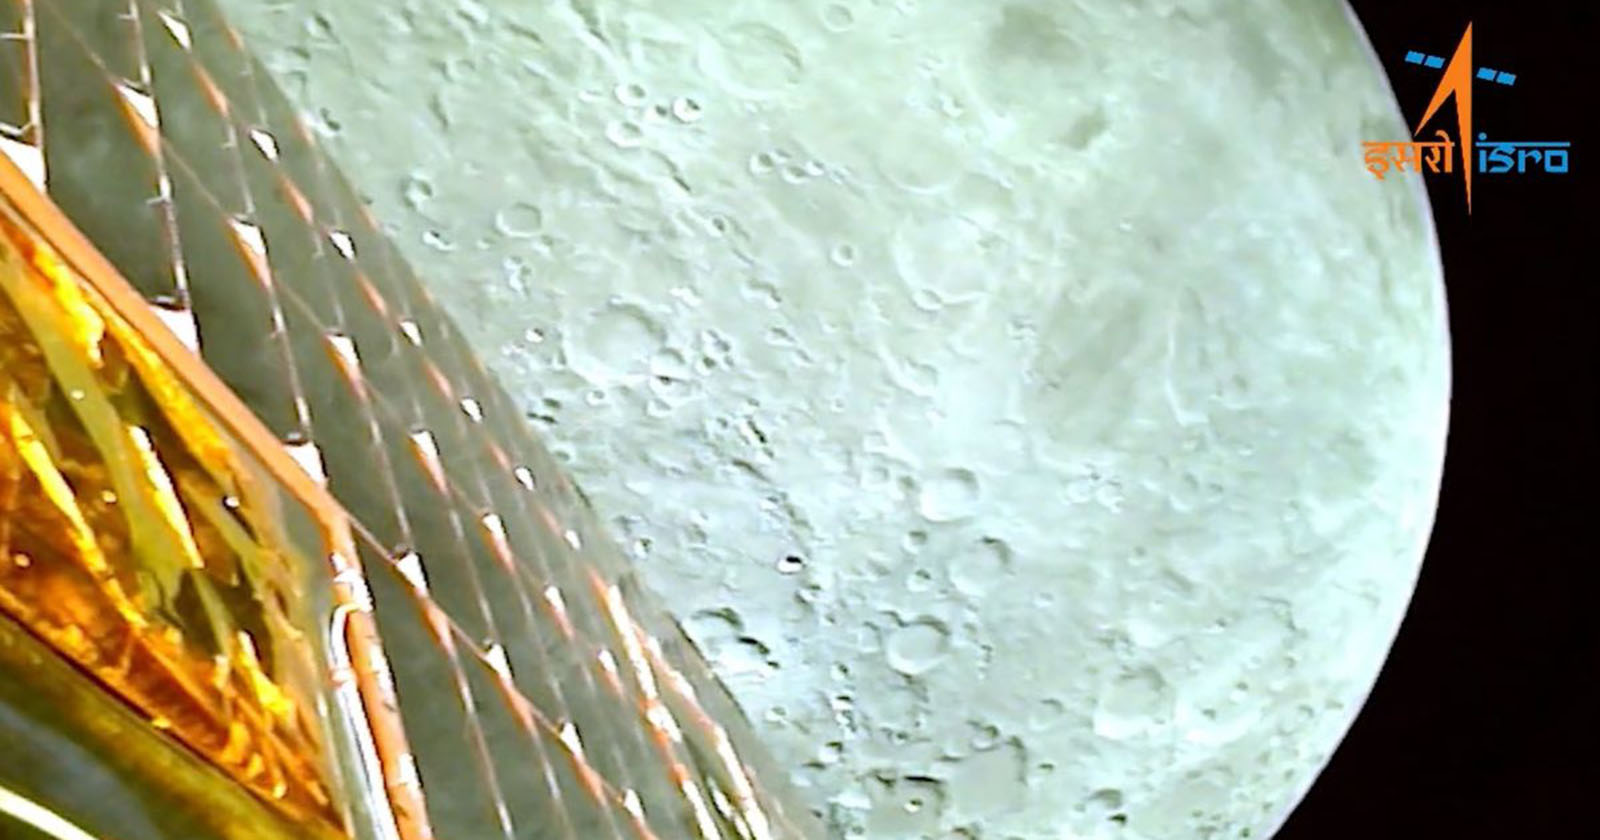 Indias Historic Chandrayaan-3 Orbiter Delivers Incredible Photos of the Moon